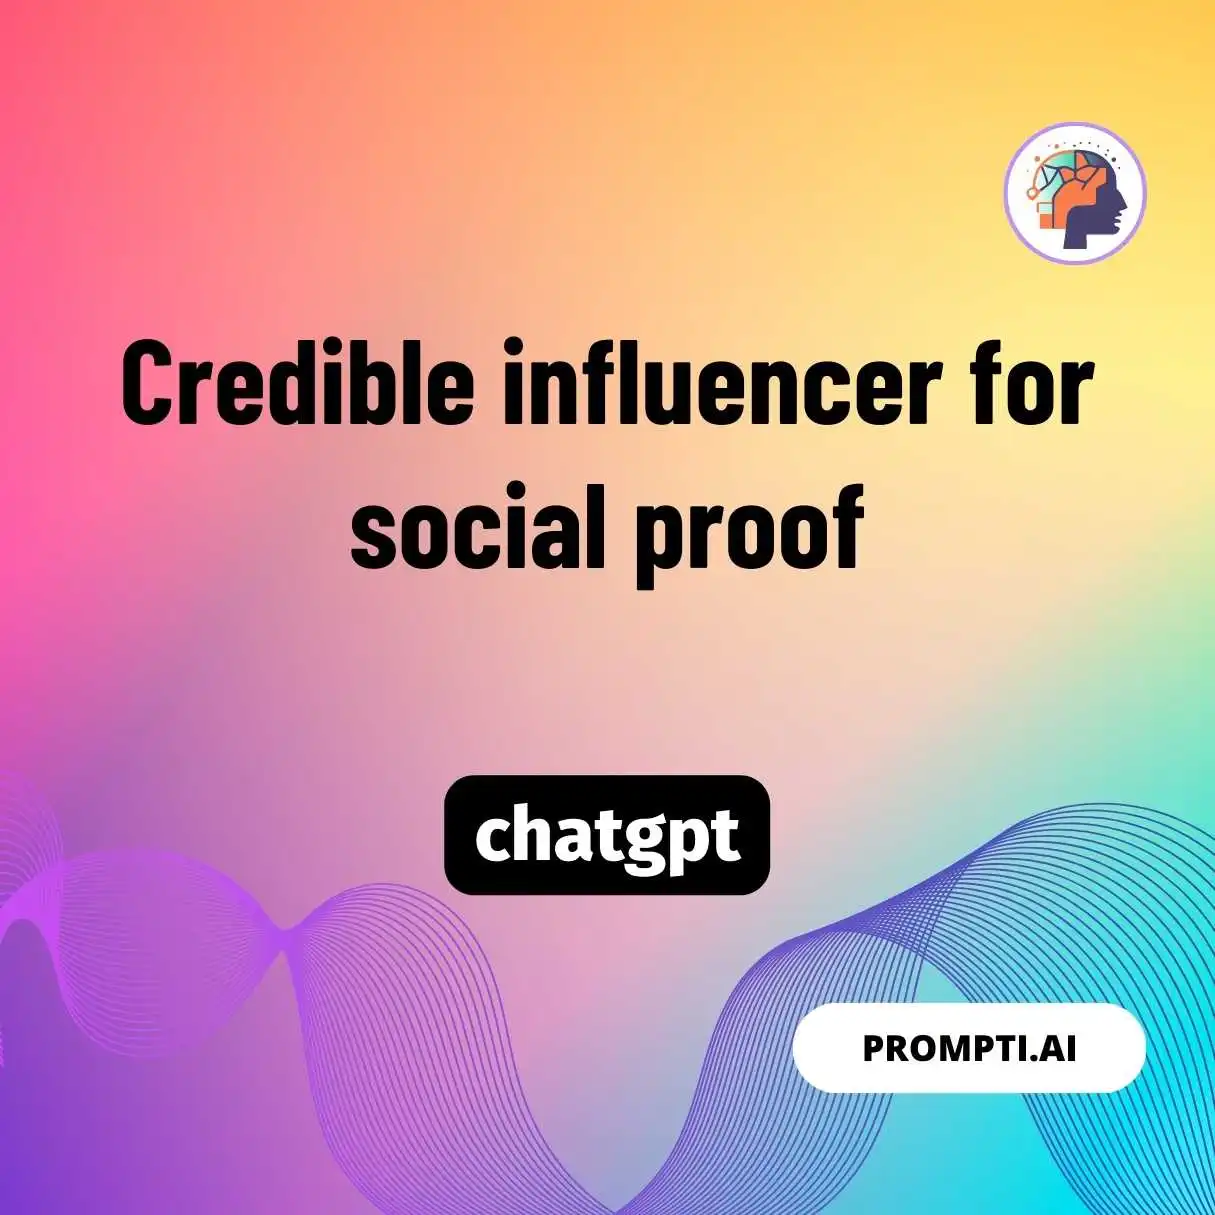 Credible influencer for social proof